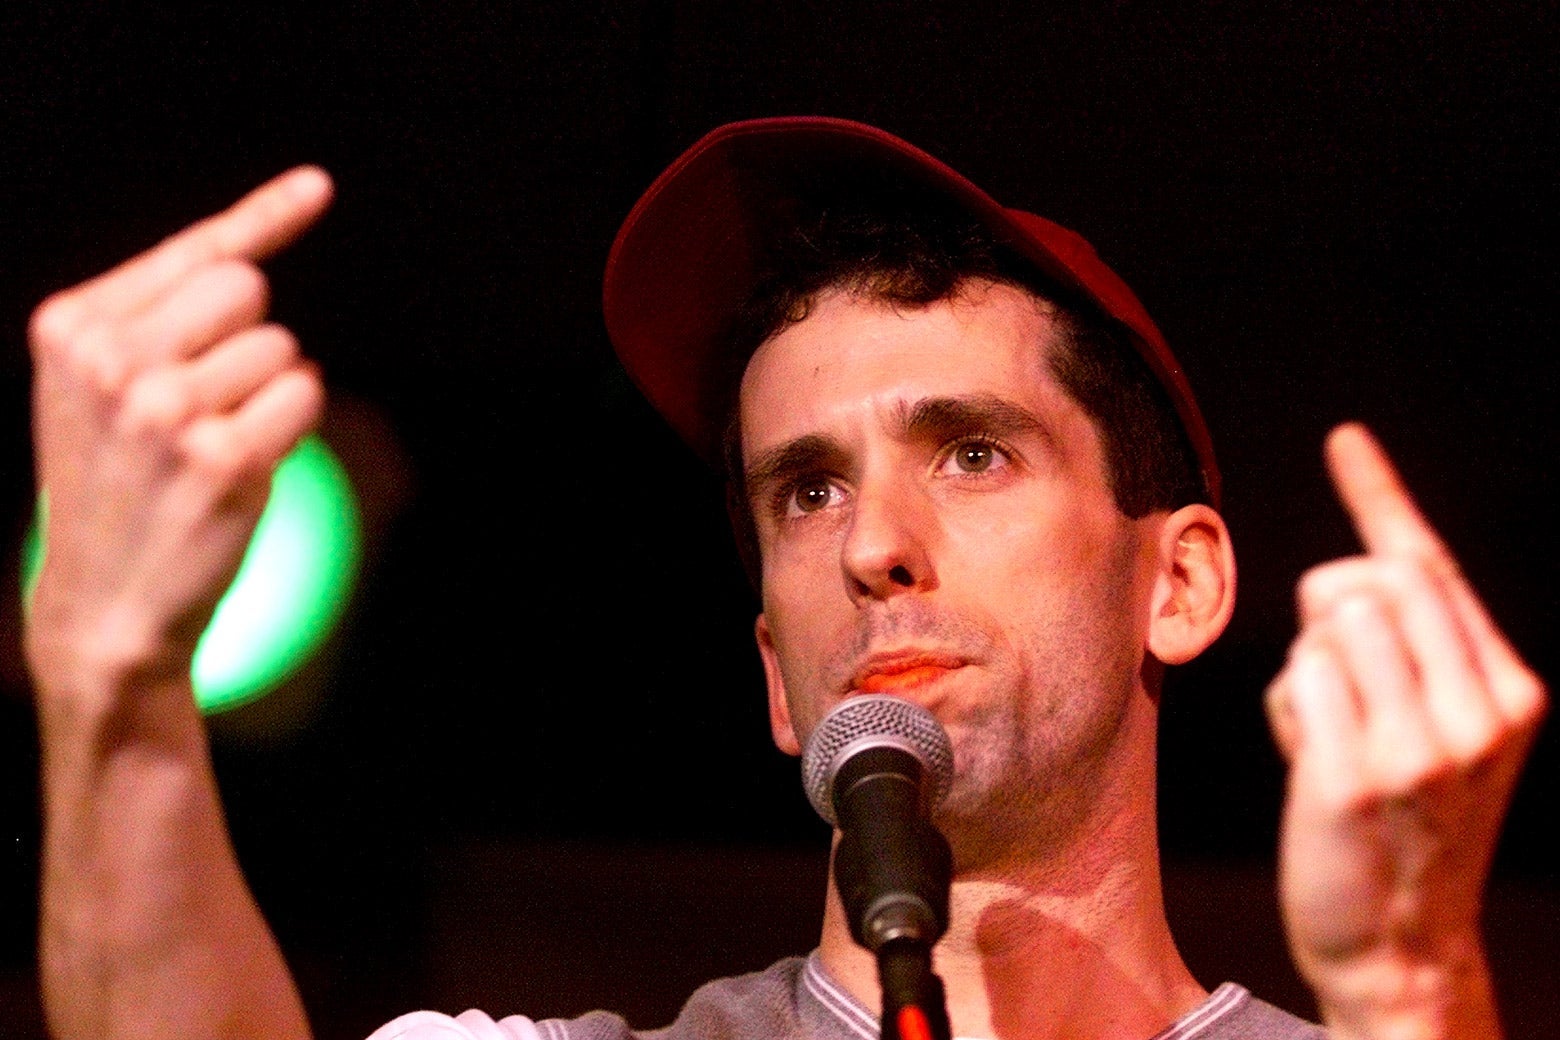 Dan Savage, wearing a red baseball cap and behind a microphone, points both index fingers updward.